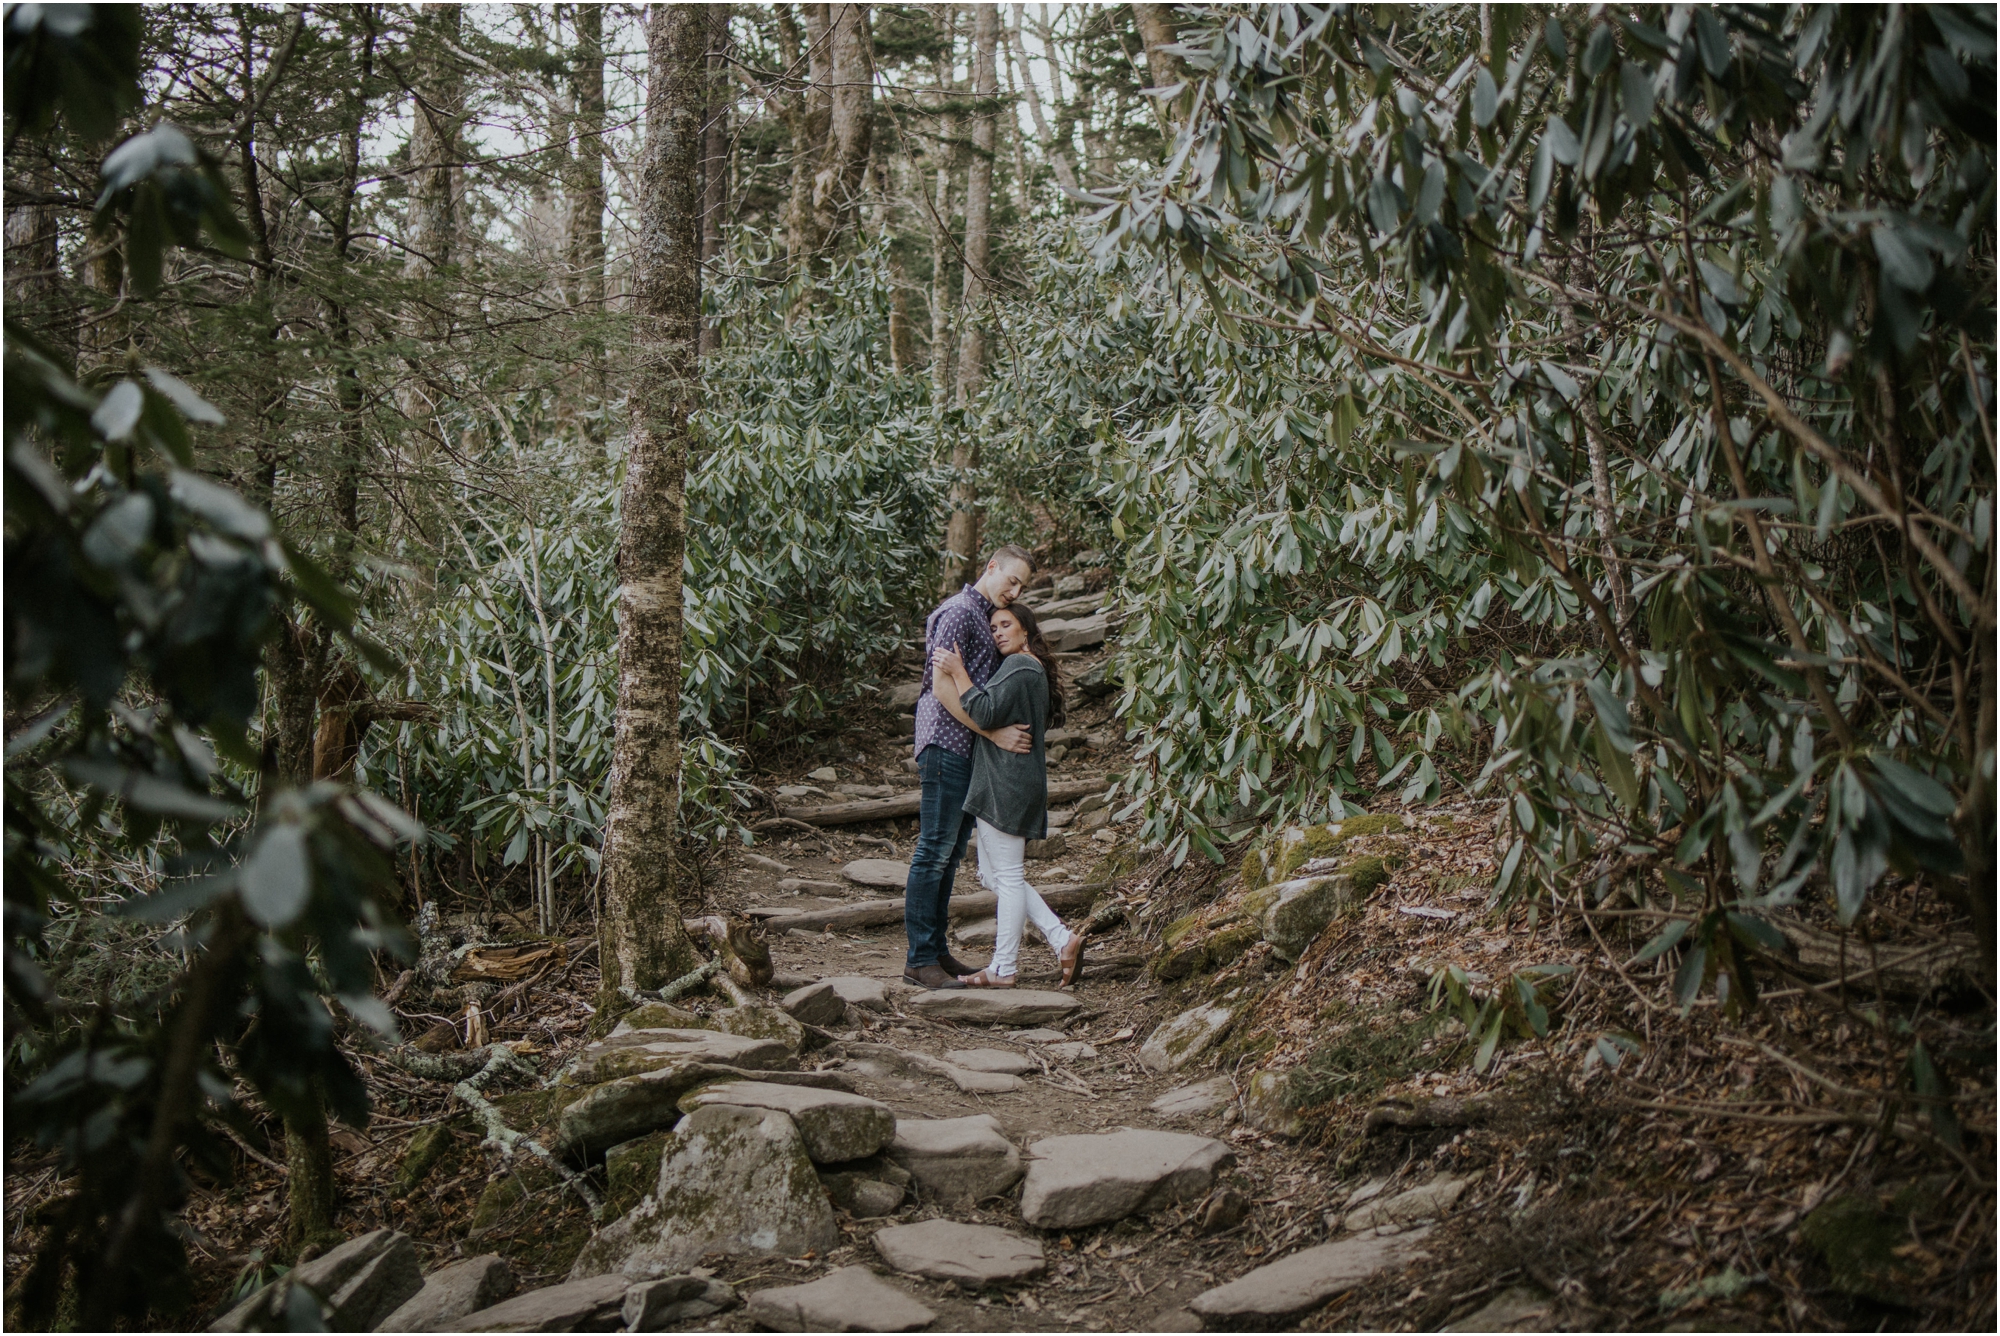 blue-ridge-parkway-engagement-session-north-carolina-boone-blowing-rock-northeast-tennessee-katy-sergent-photography_0008.jpg